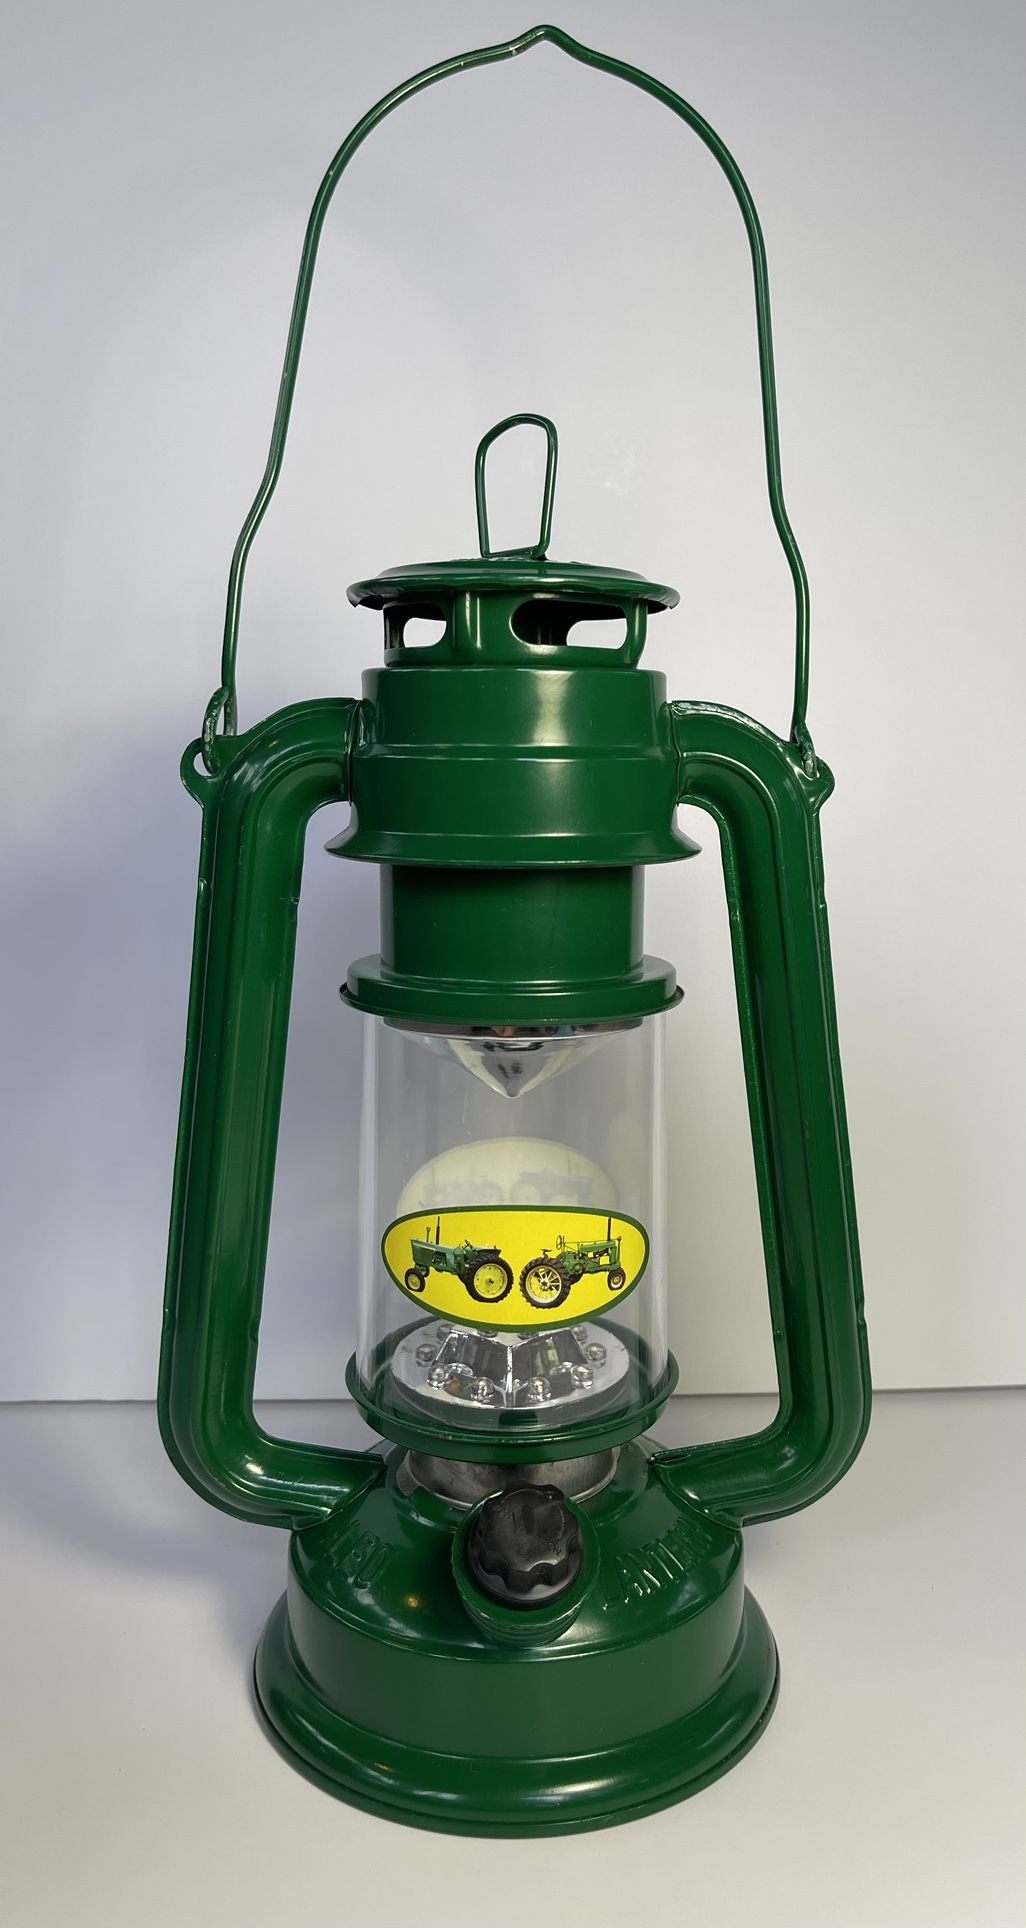 LED Vintage Style Lantern, Tractor Decals